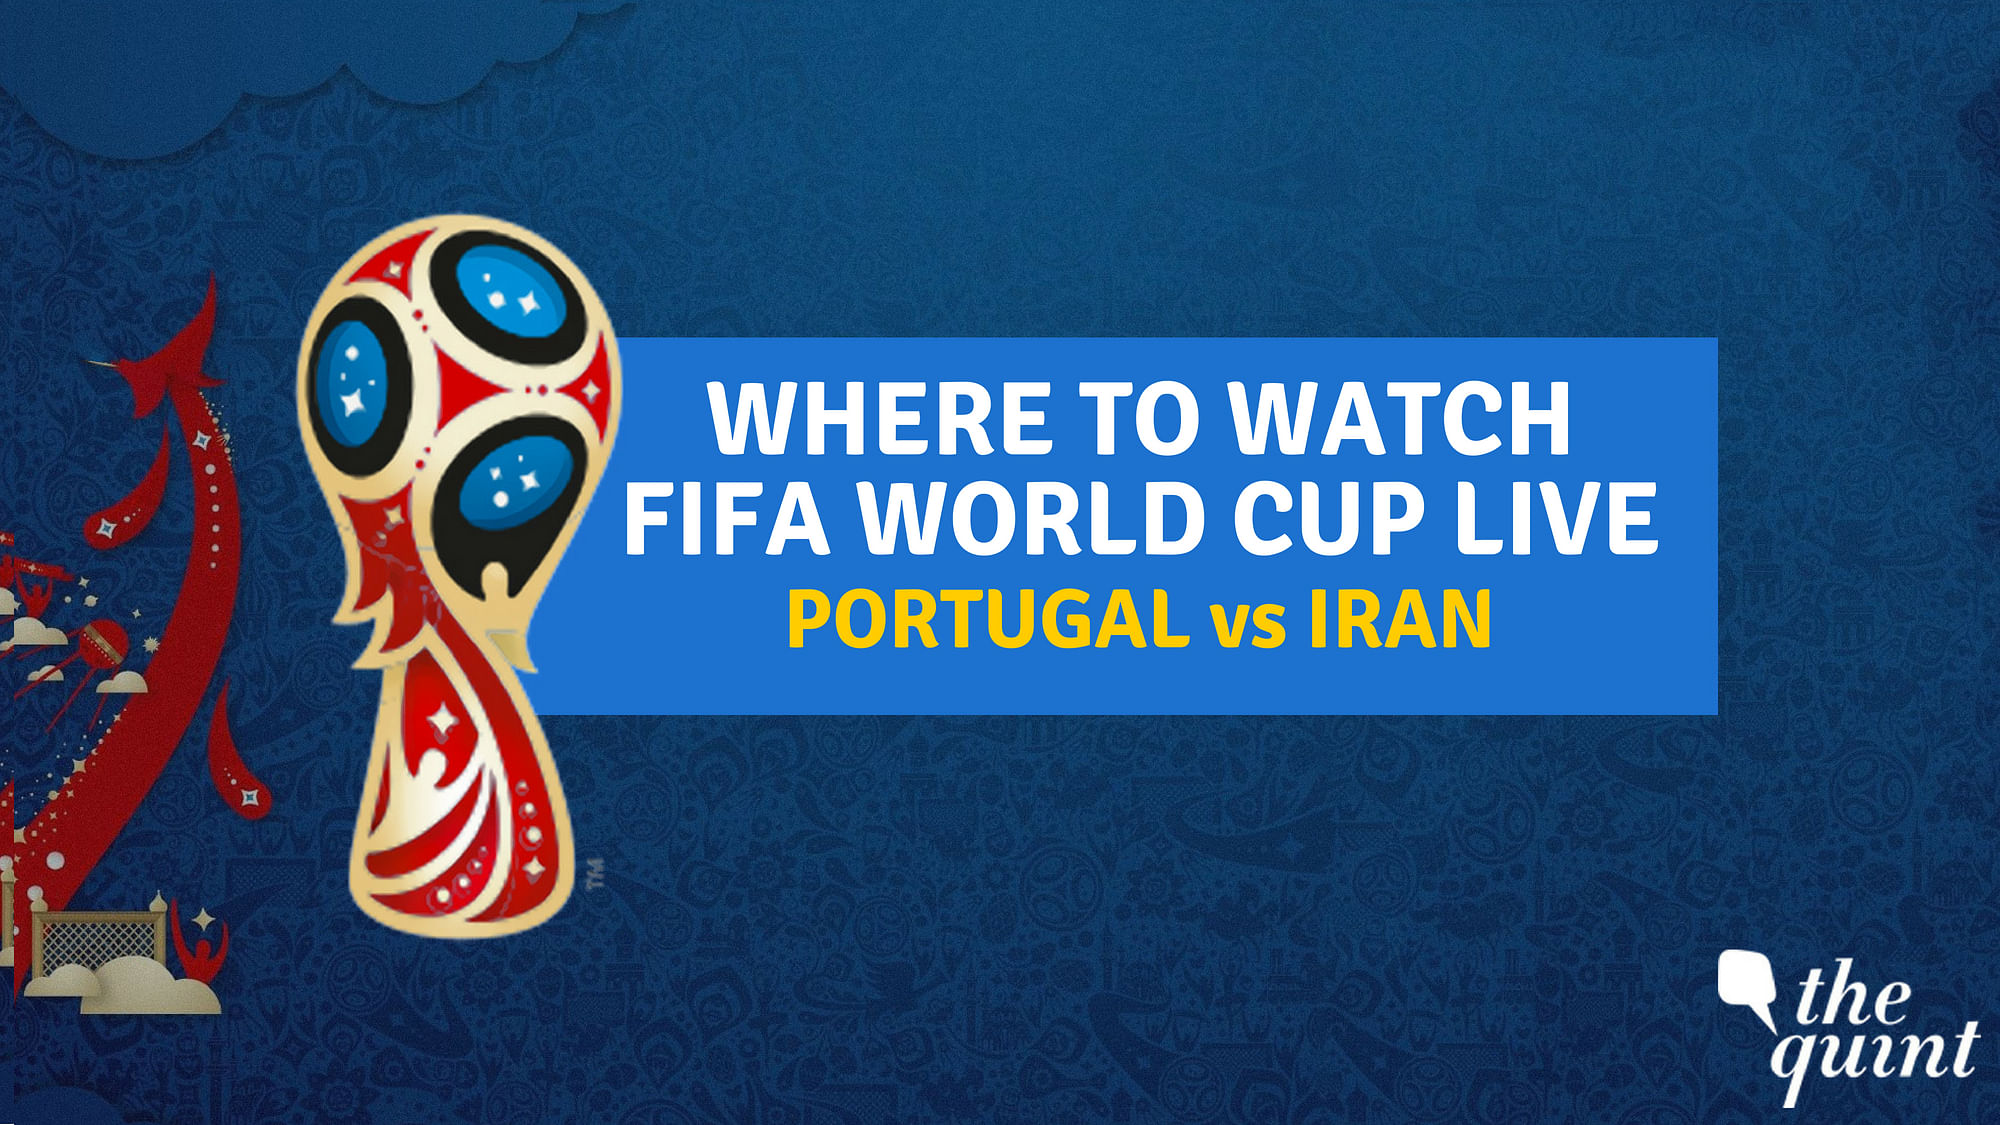 Portugal vs Iran FIFA World Cup 2018 LIVE Watch Online and on TV